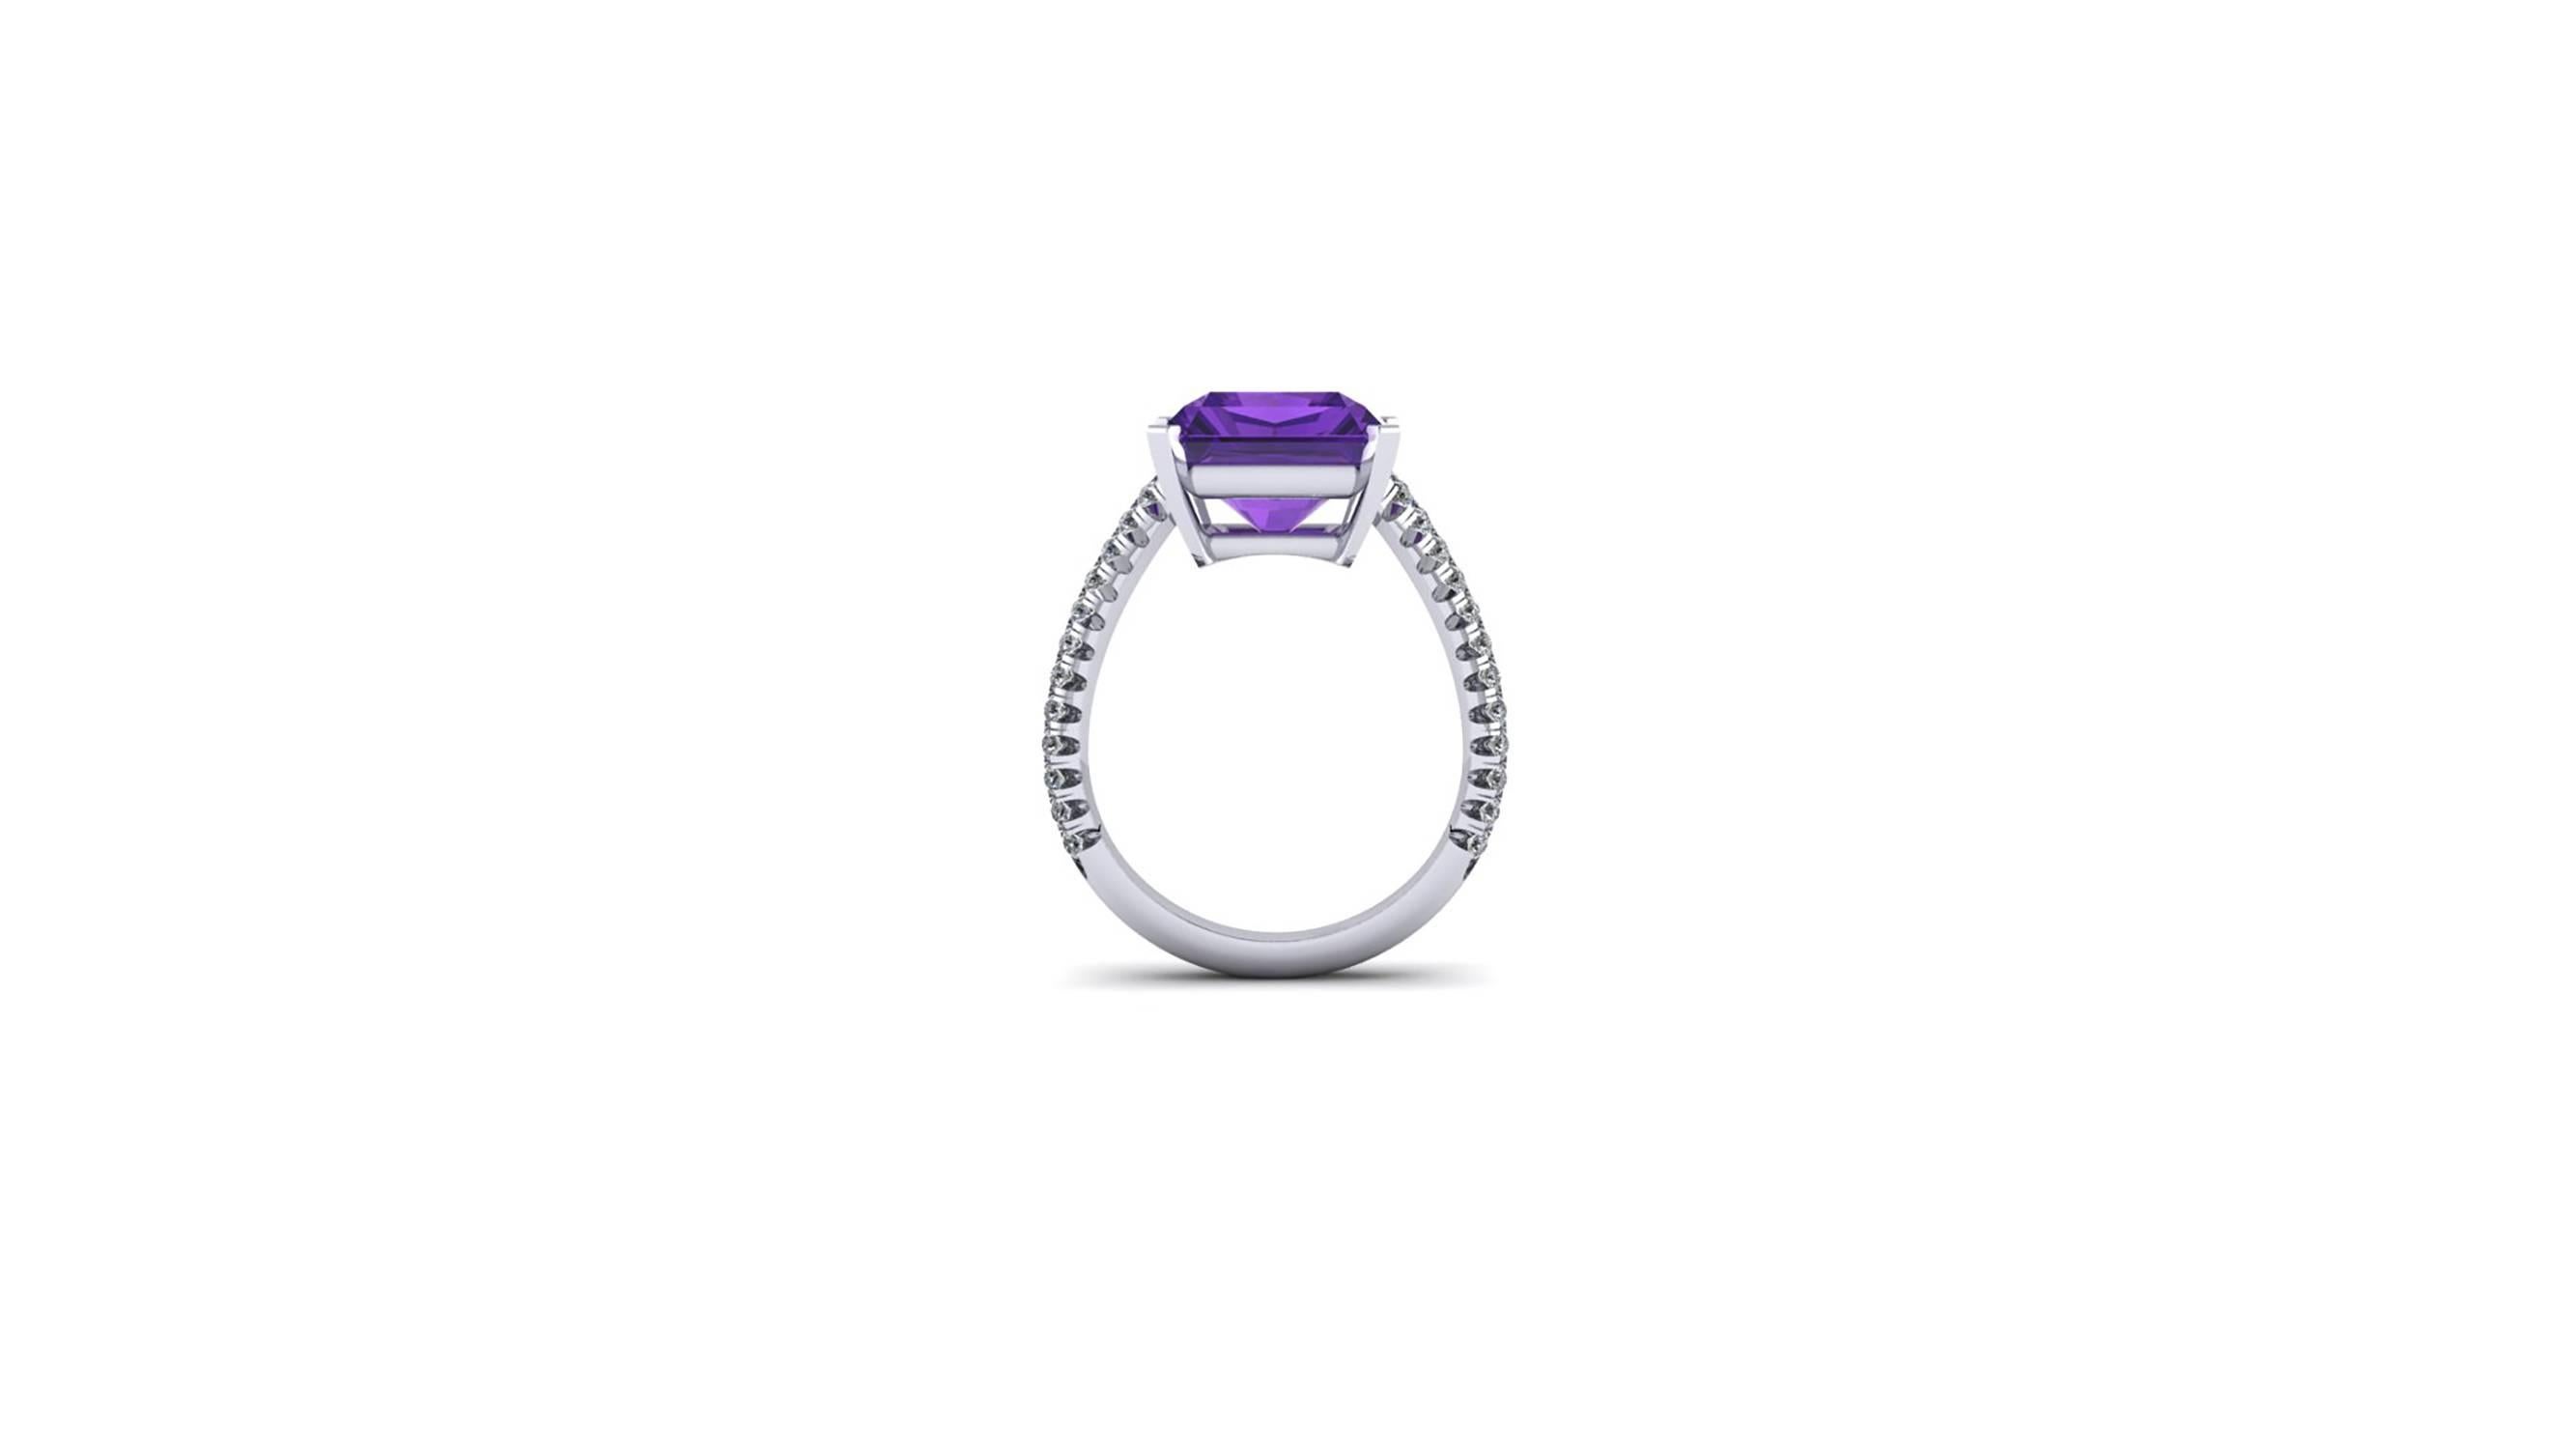 Ferrucci 8.1 carat Amethyst set in 18k white gold hand made cocktail ring,
with 0.50 carats of white diamonds, Vs clarity, hand set by Italian master jeweler, this ring is a size 6 1/2 and we offer complimentary sizing upon order.

A unique stunning